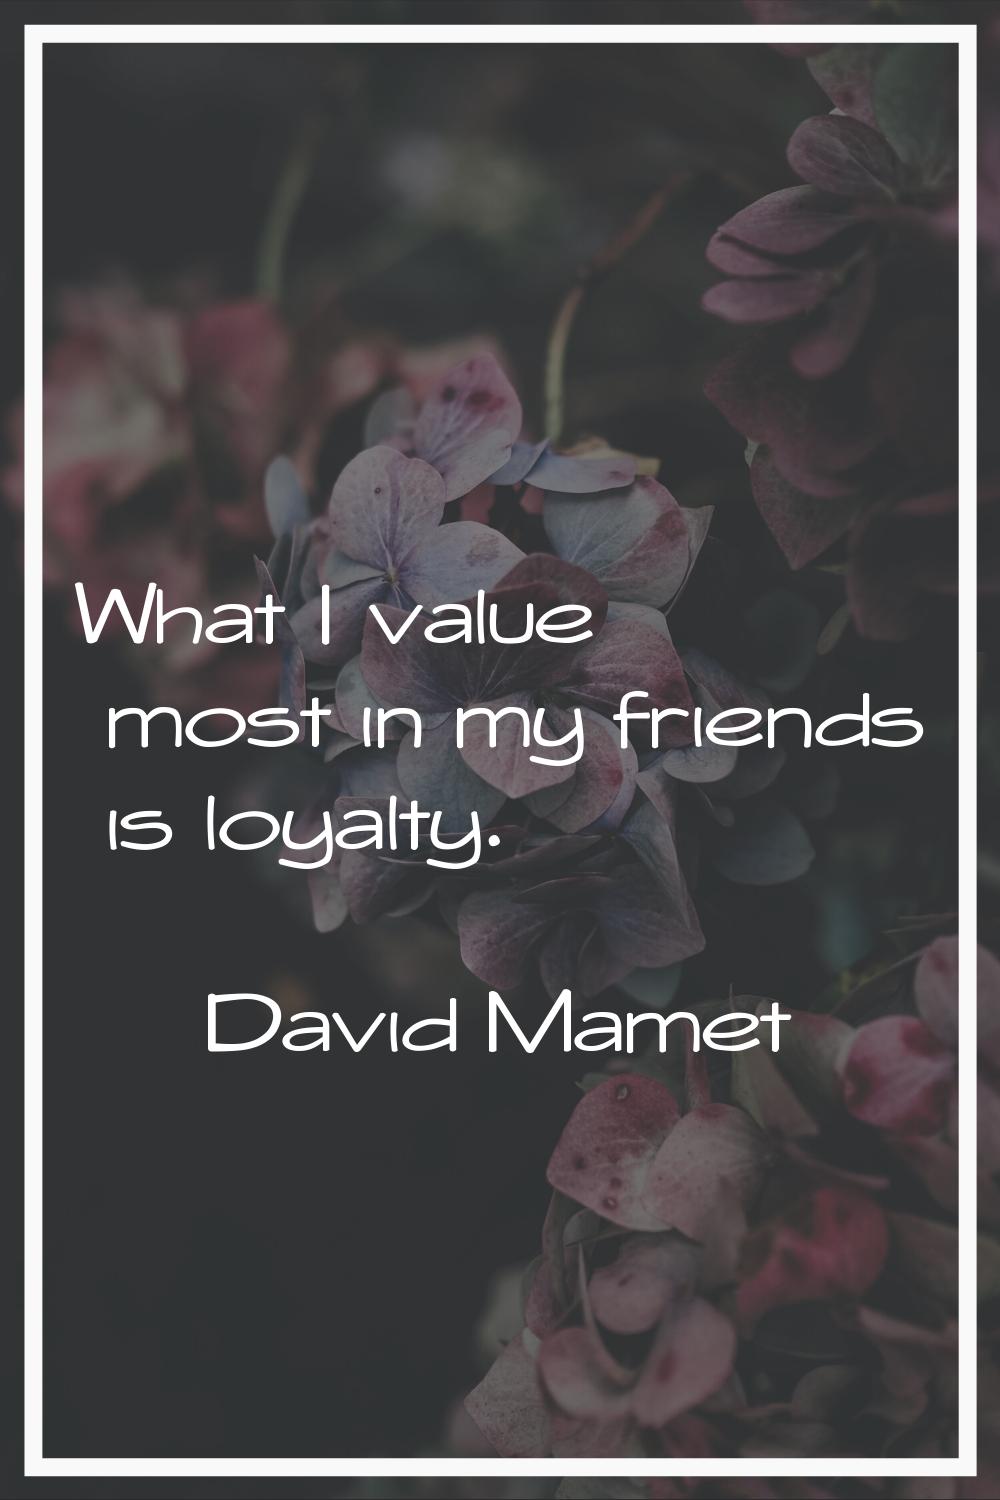 What I value most in my friends is loyalty.